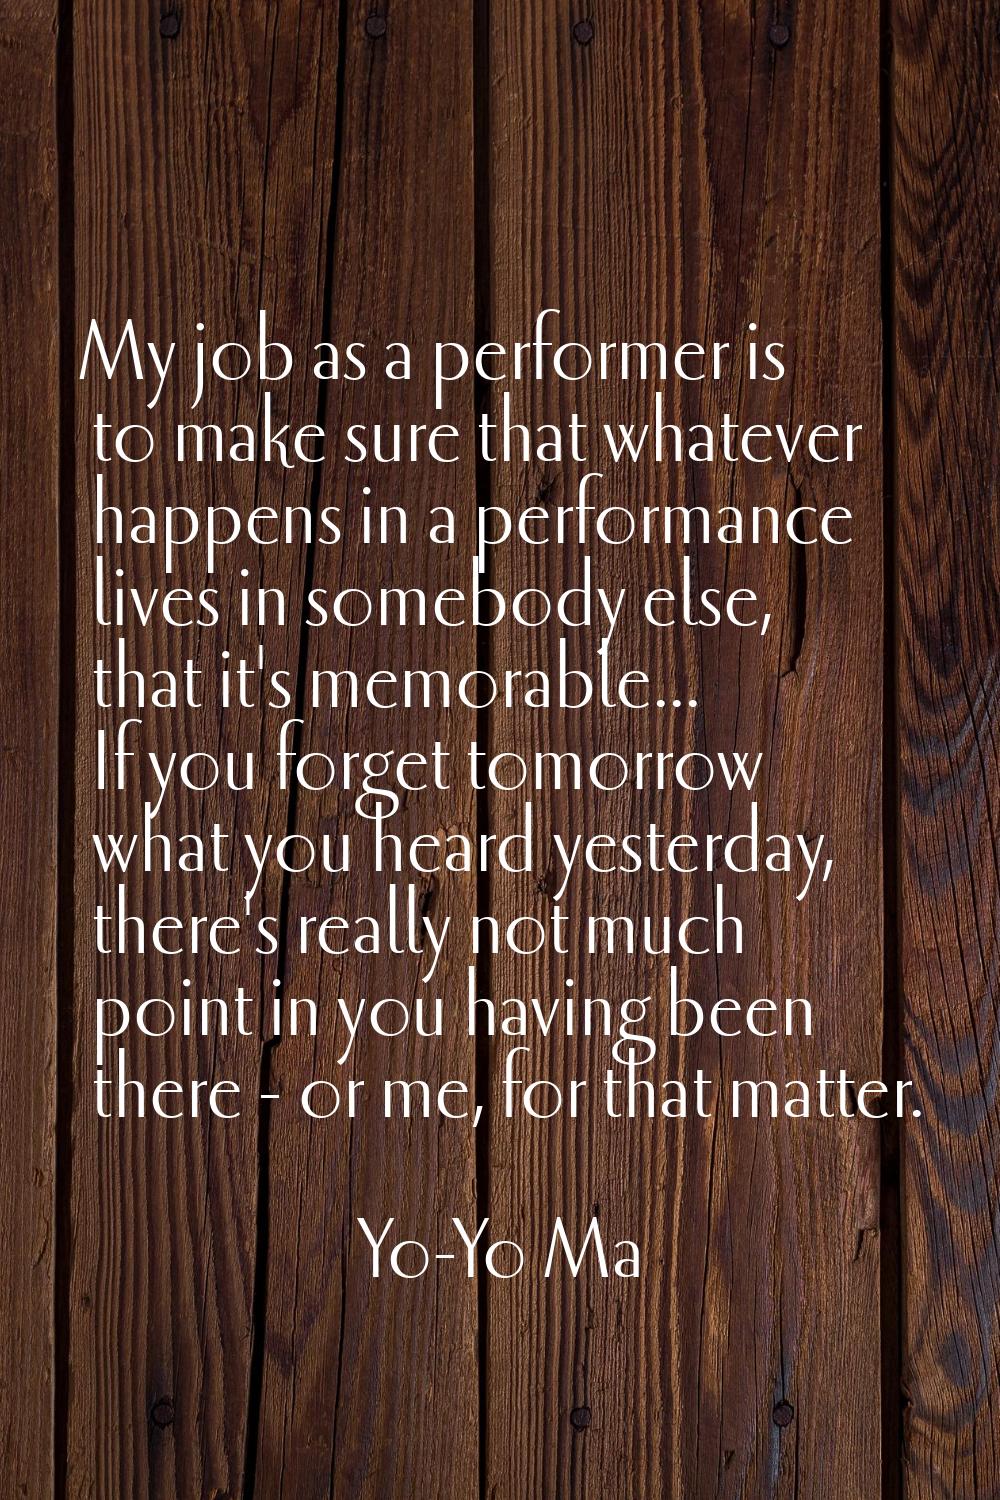 My job as a performer is to make sure that whatever happens in a performance lives in somebody else